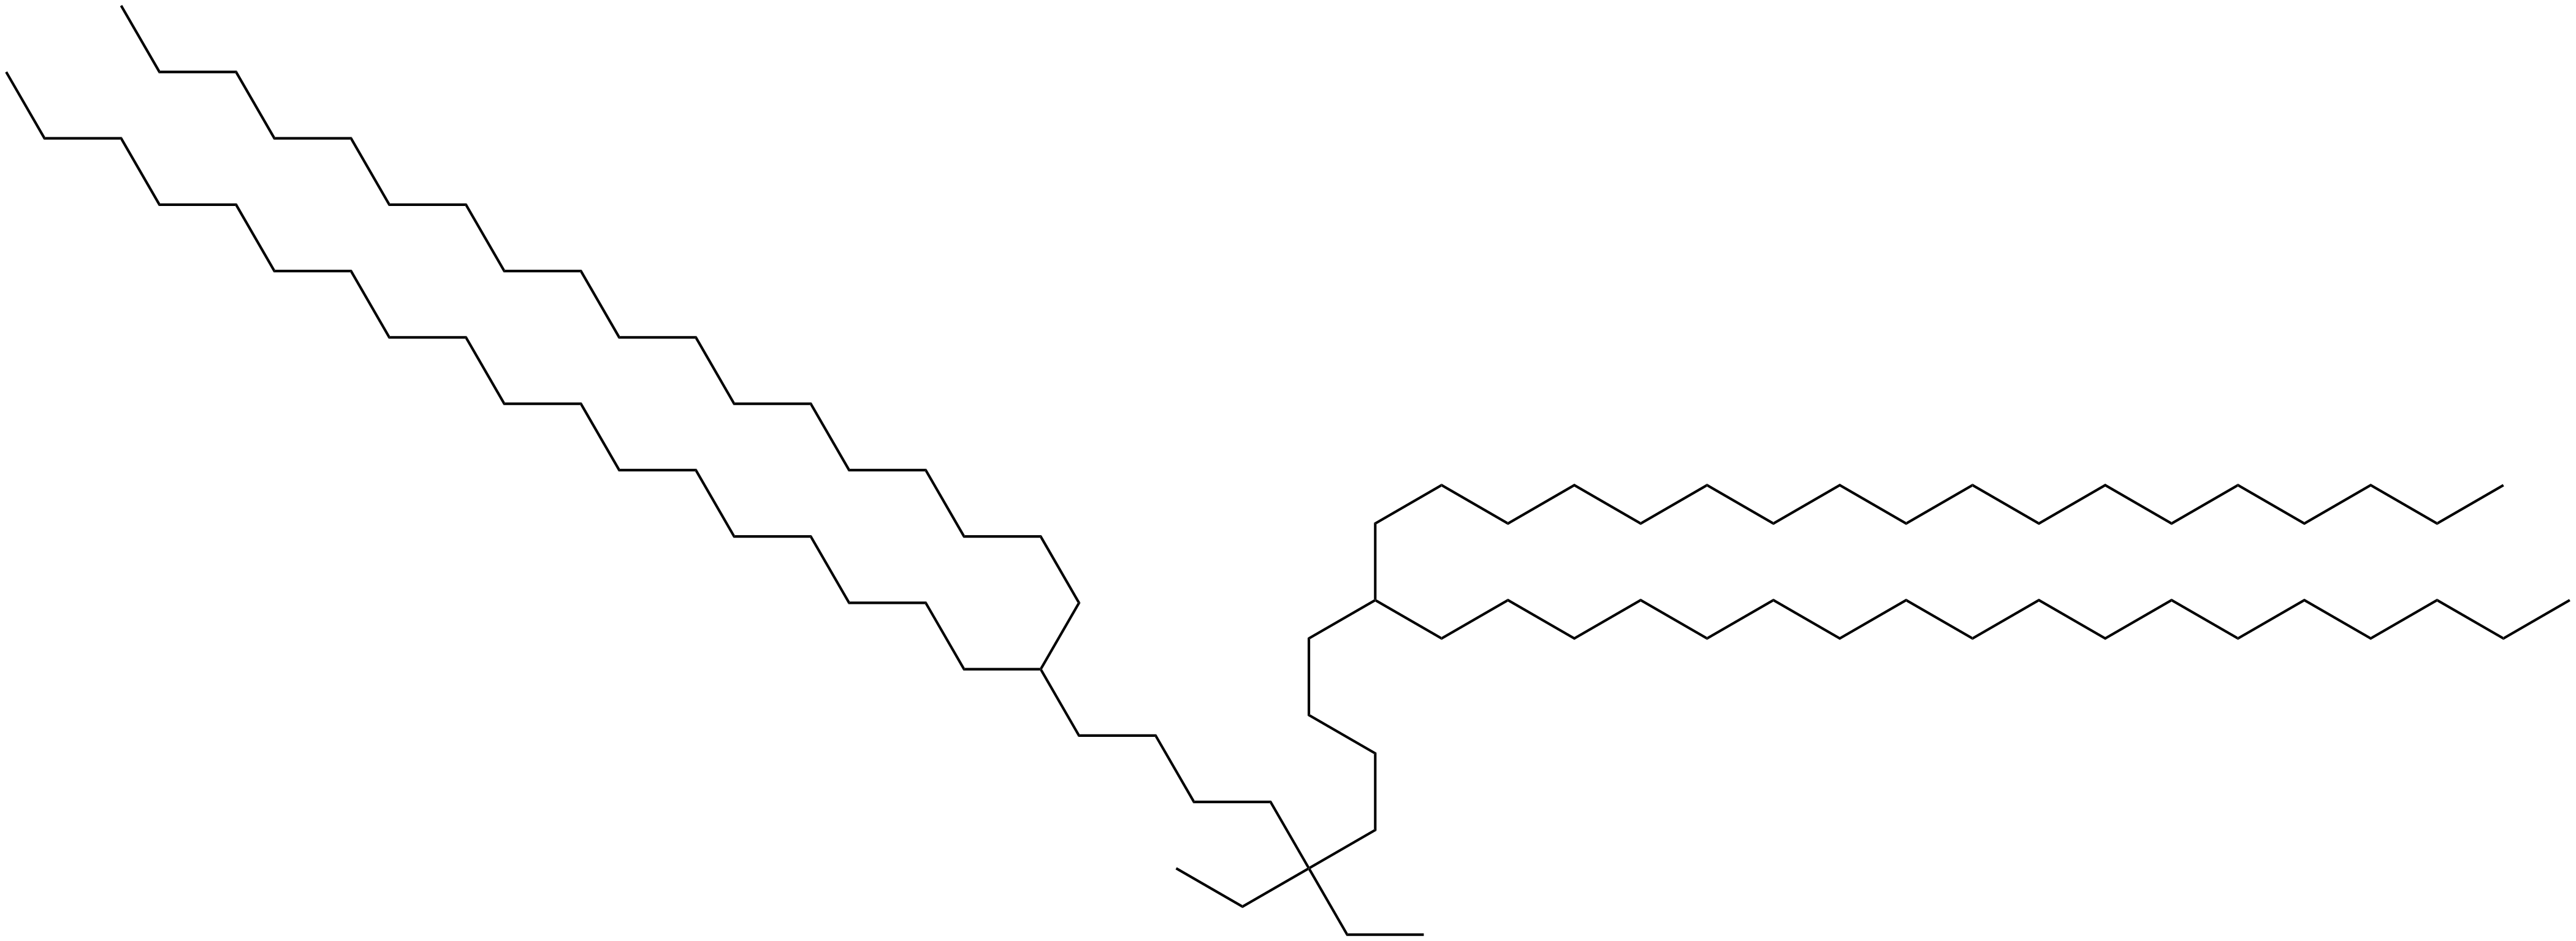 Image of 24,24-diethyl-19,29-dioctadecylheptatetracontane